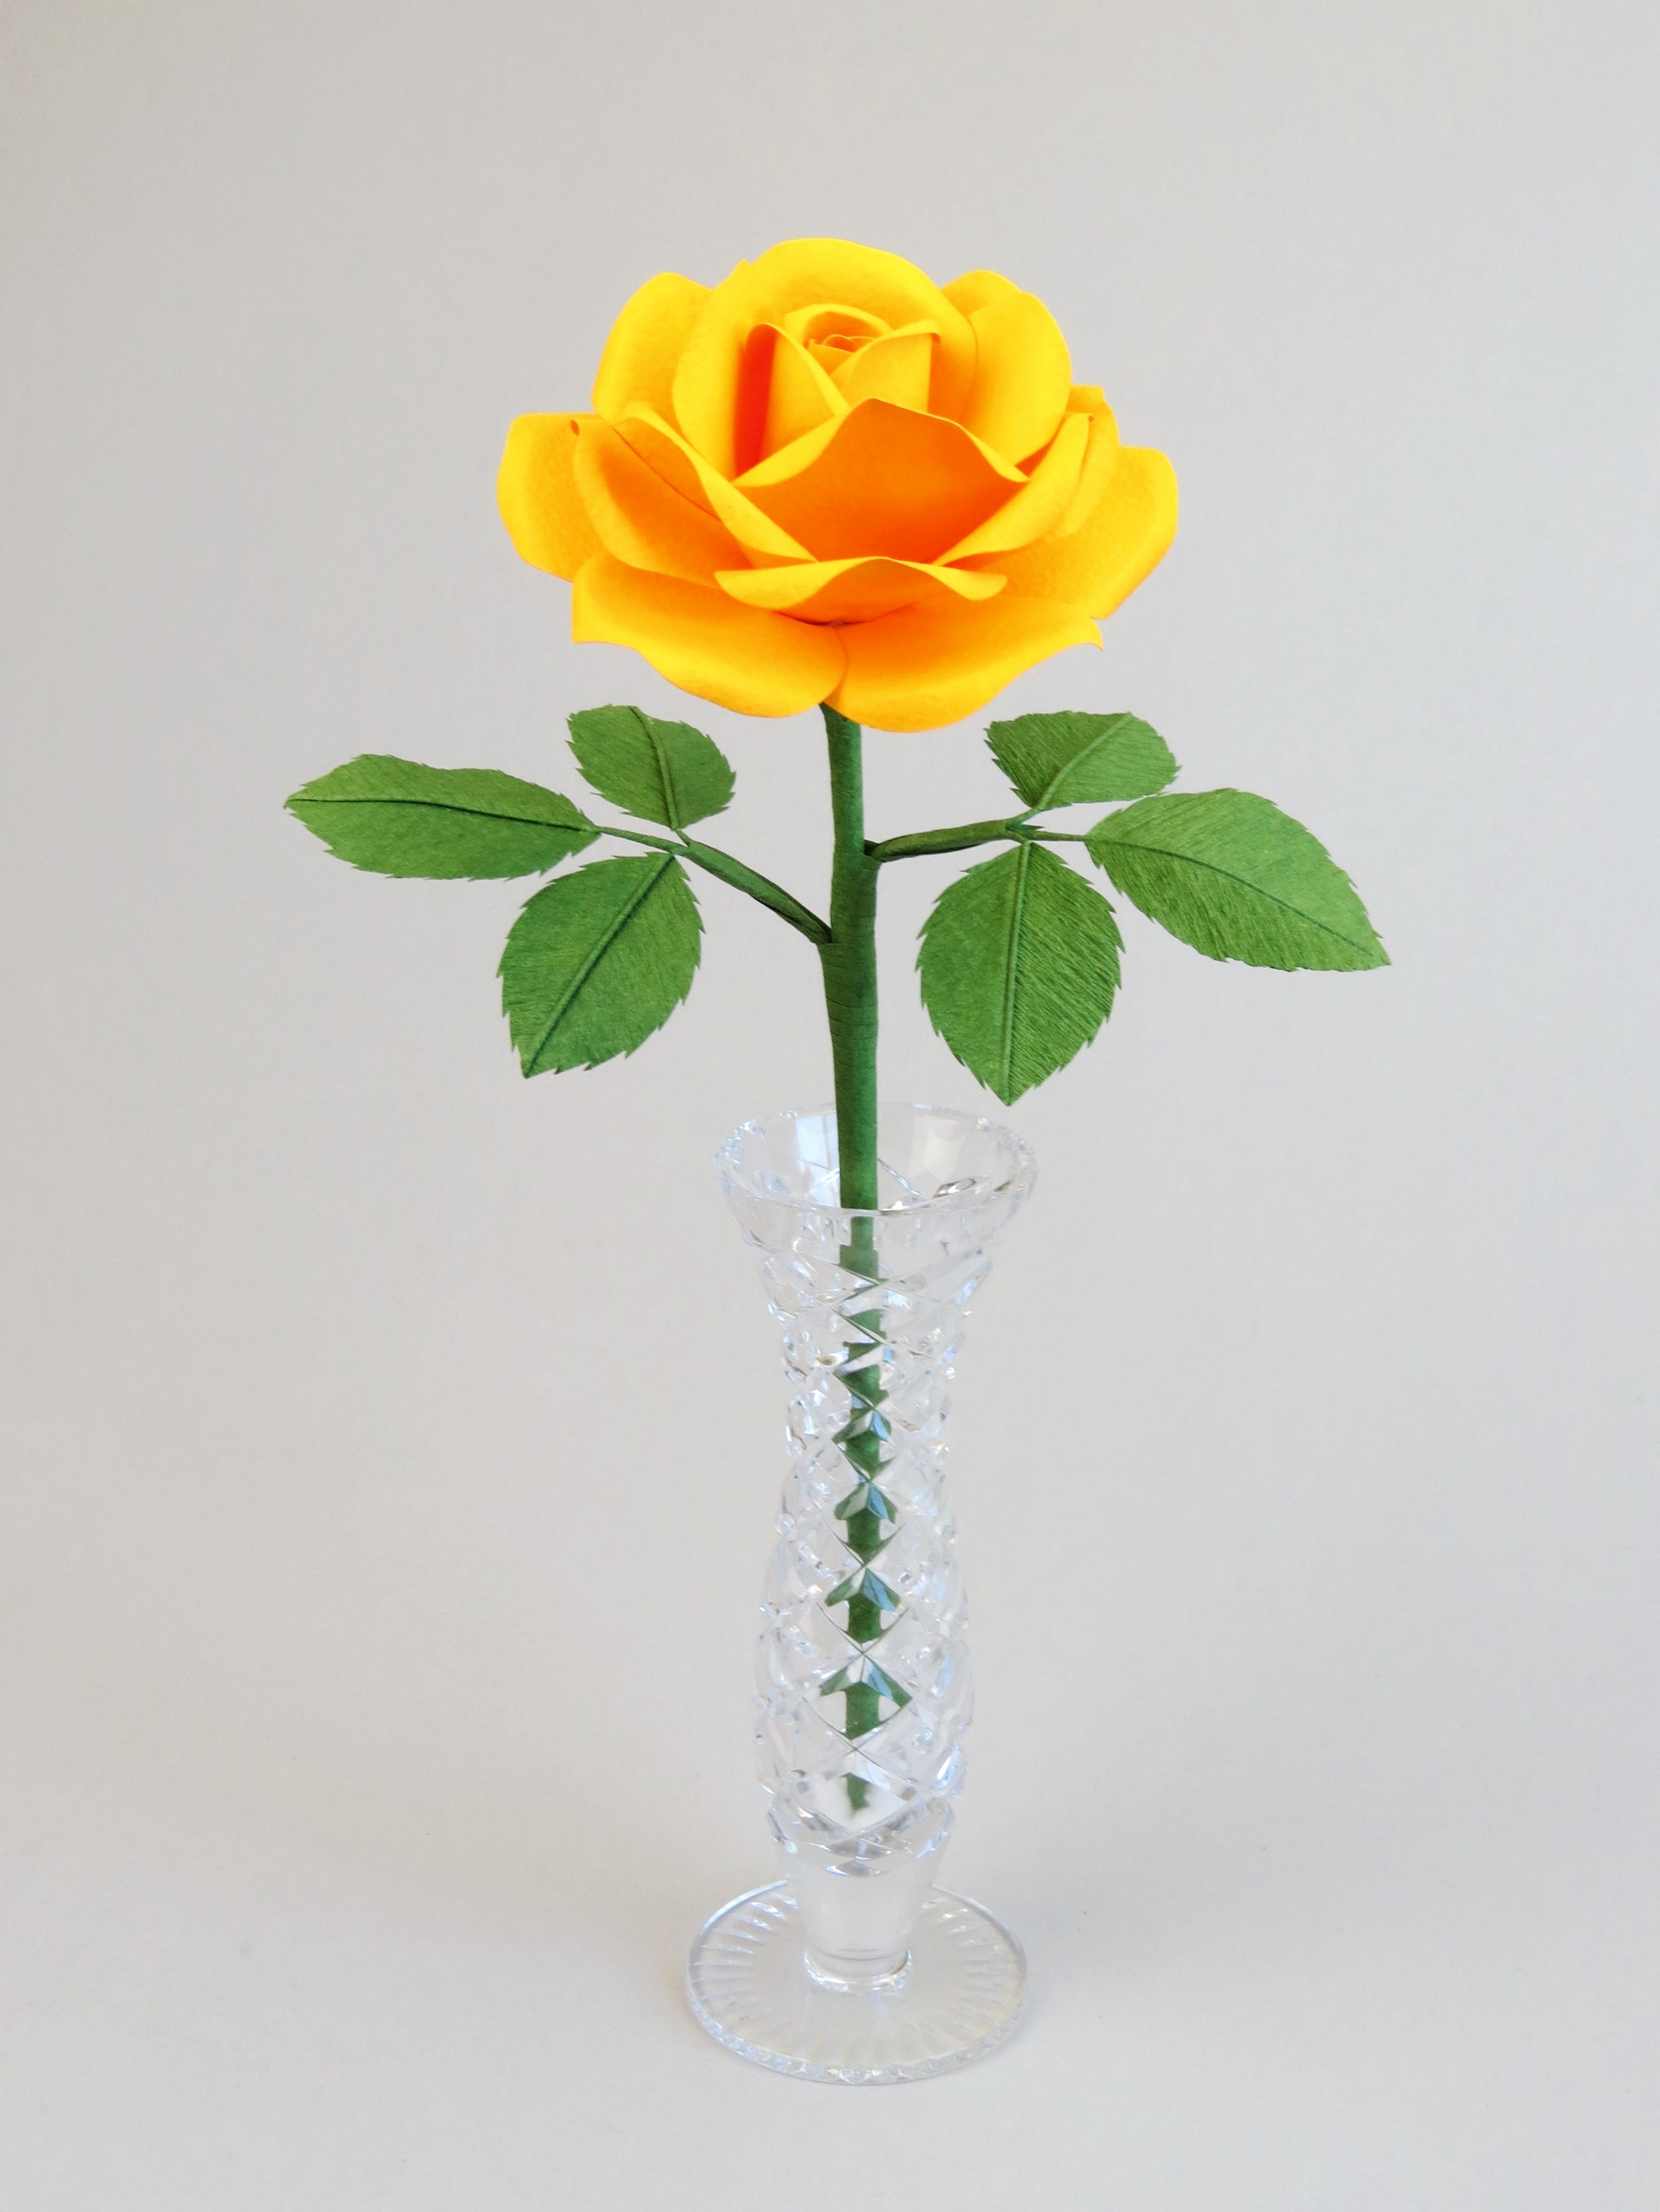 Yellow cotton paper rose with six green leaves standing in a narrow glass vase against a light grey background